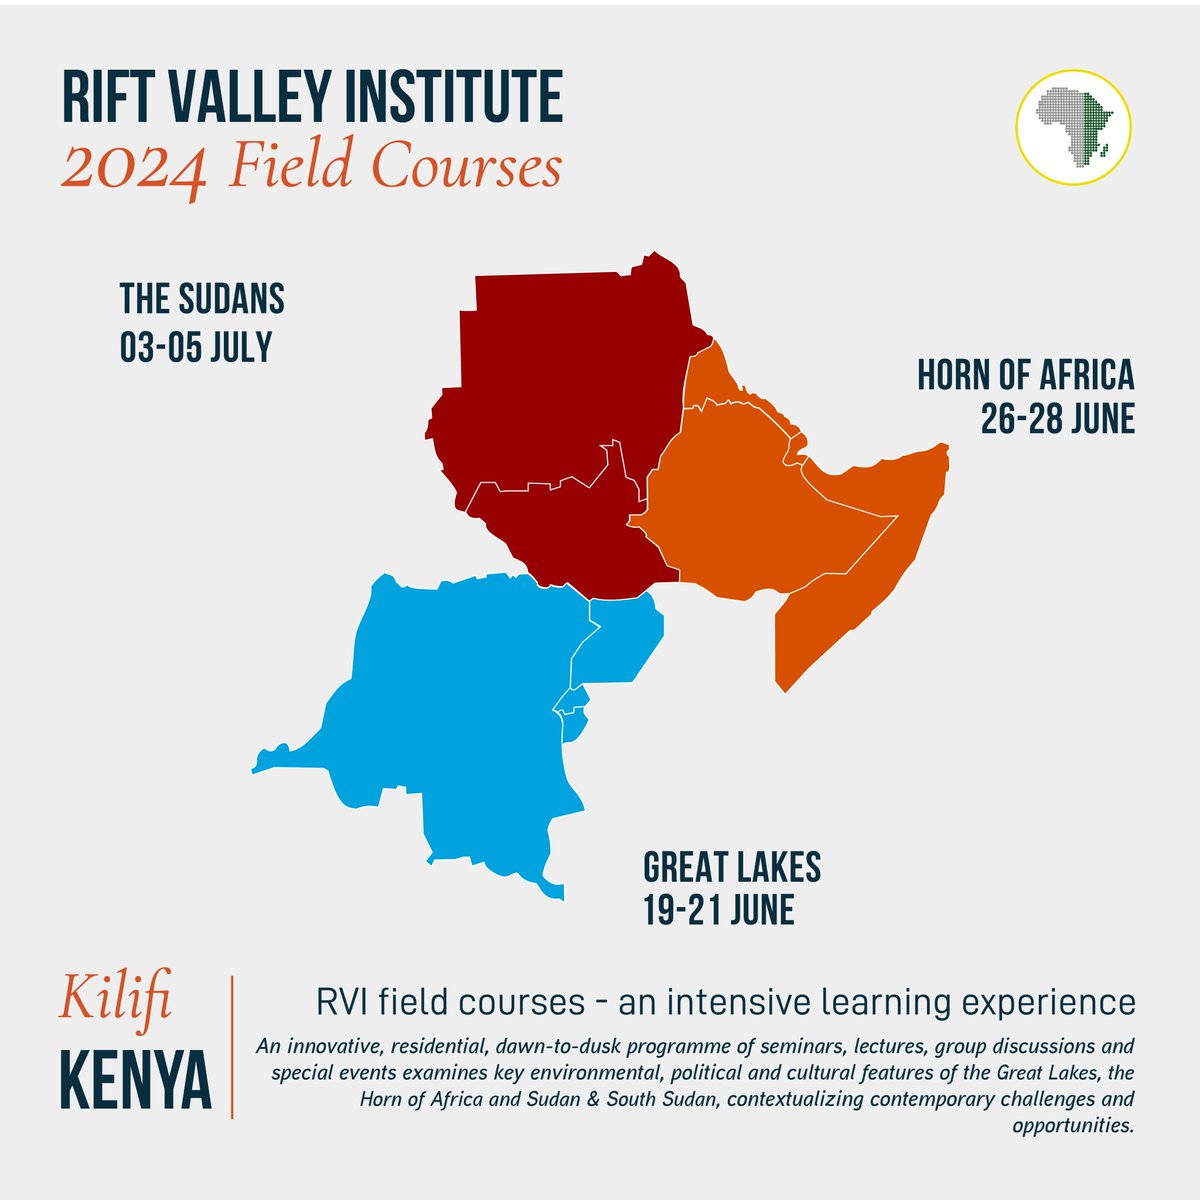 ANNOUNCEMENT | 2024 Annual Courses We're thrilled to announce the return of the Great Lakes, Horn of Africa, & Sudans annual courses. Register for an unparalleled chance to network & deepen your understanding of the region alongside peers and experts. bit.ly/2024RVICourses